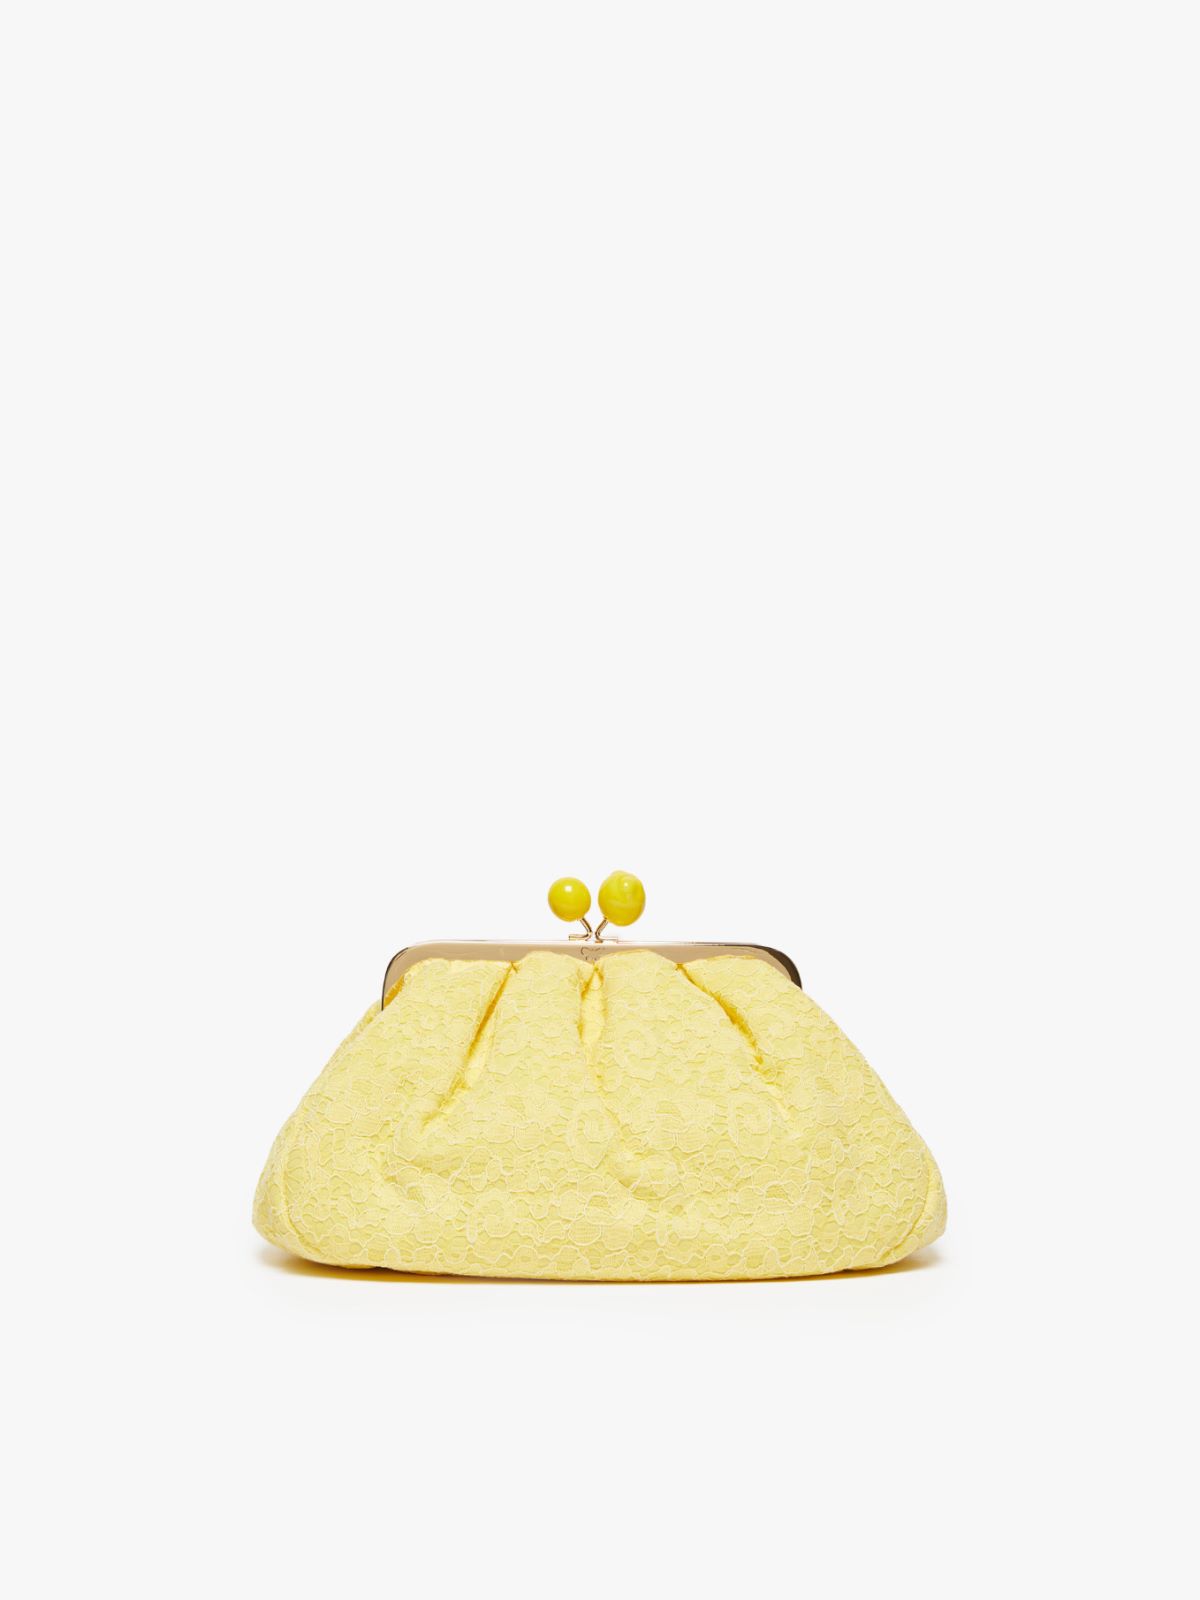 Hommage à la France Pasticcino Bag in lace - BRIGHT YELLOW - Weekend Max Mara - 3